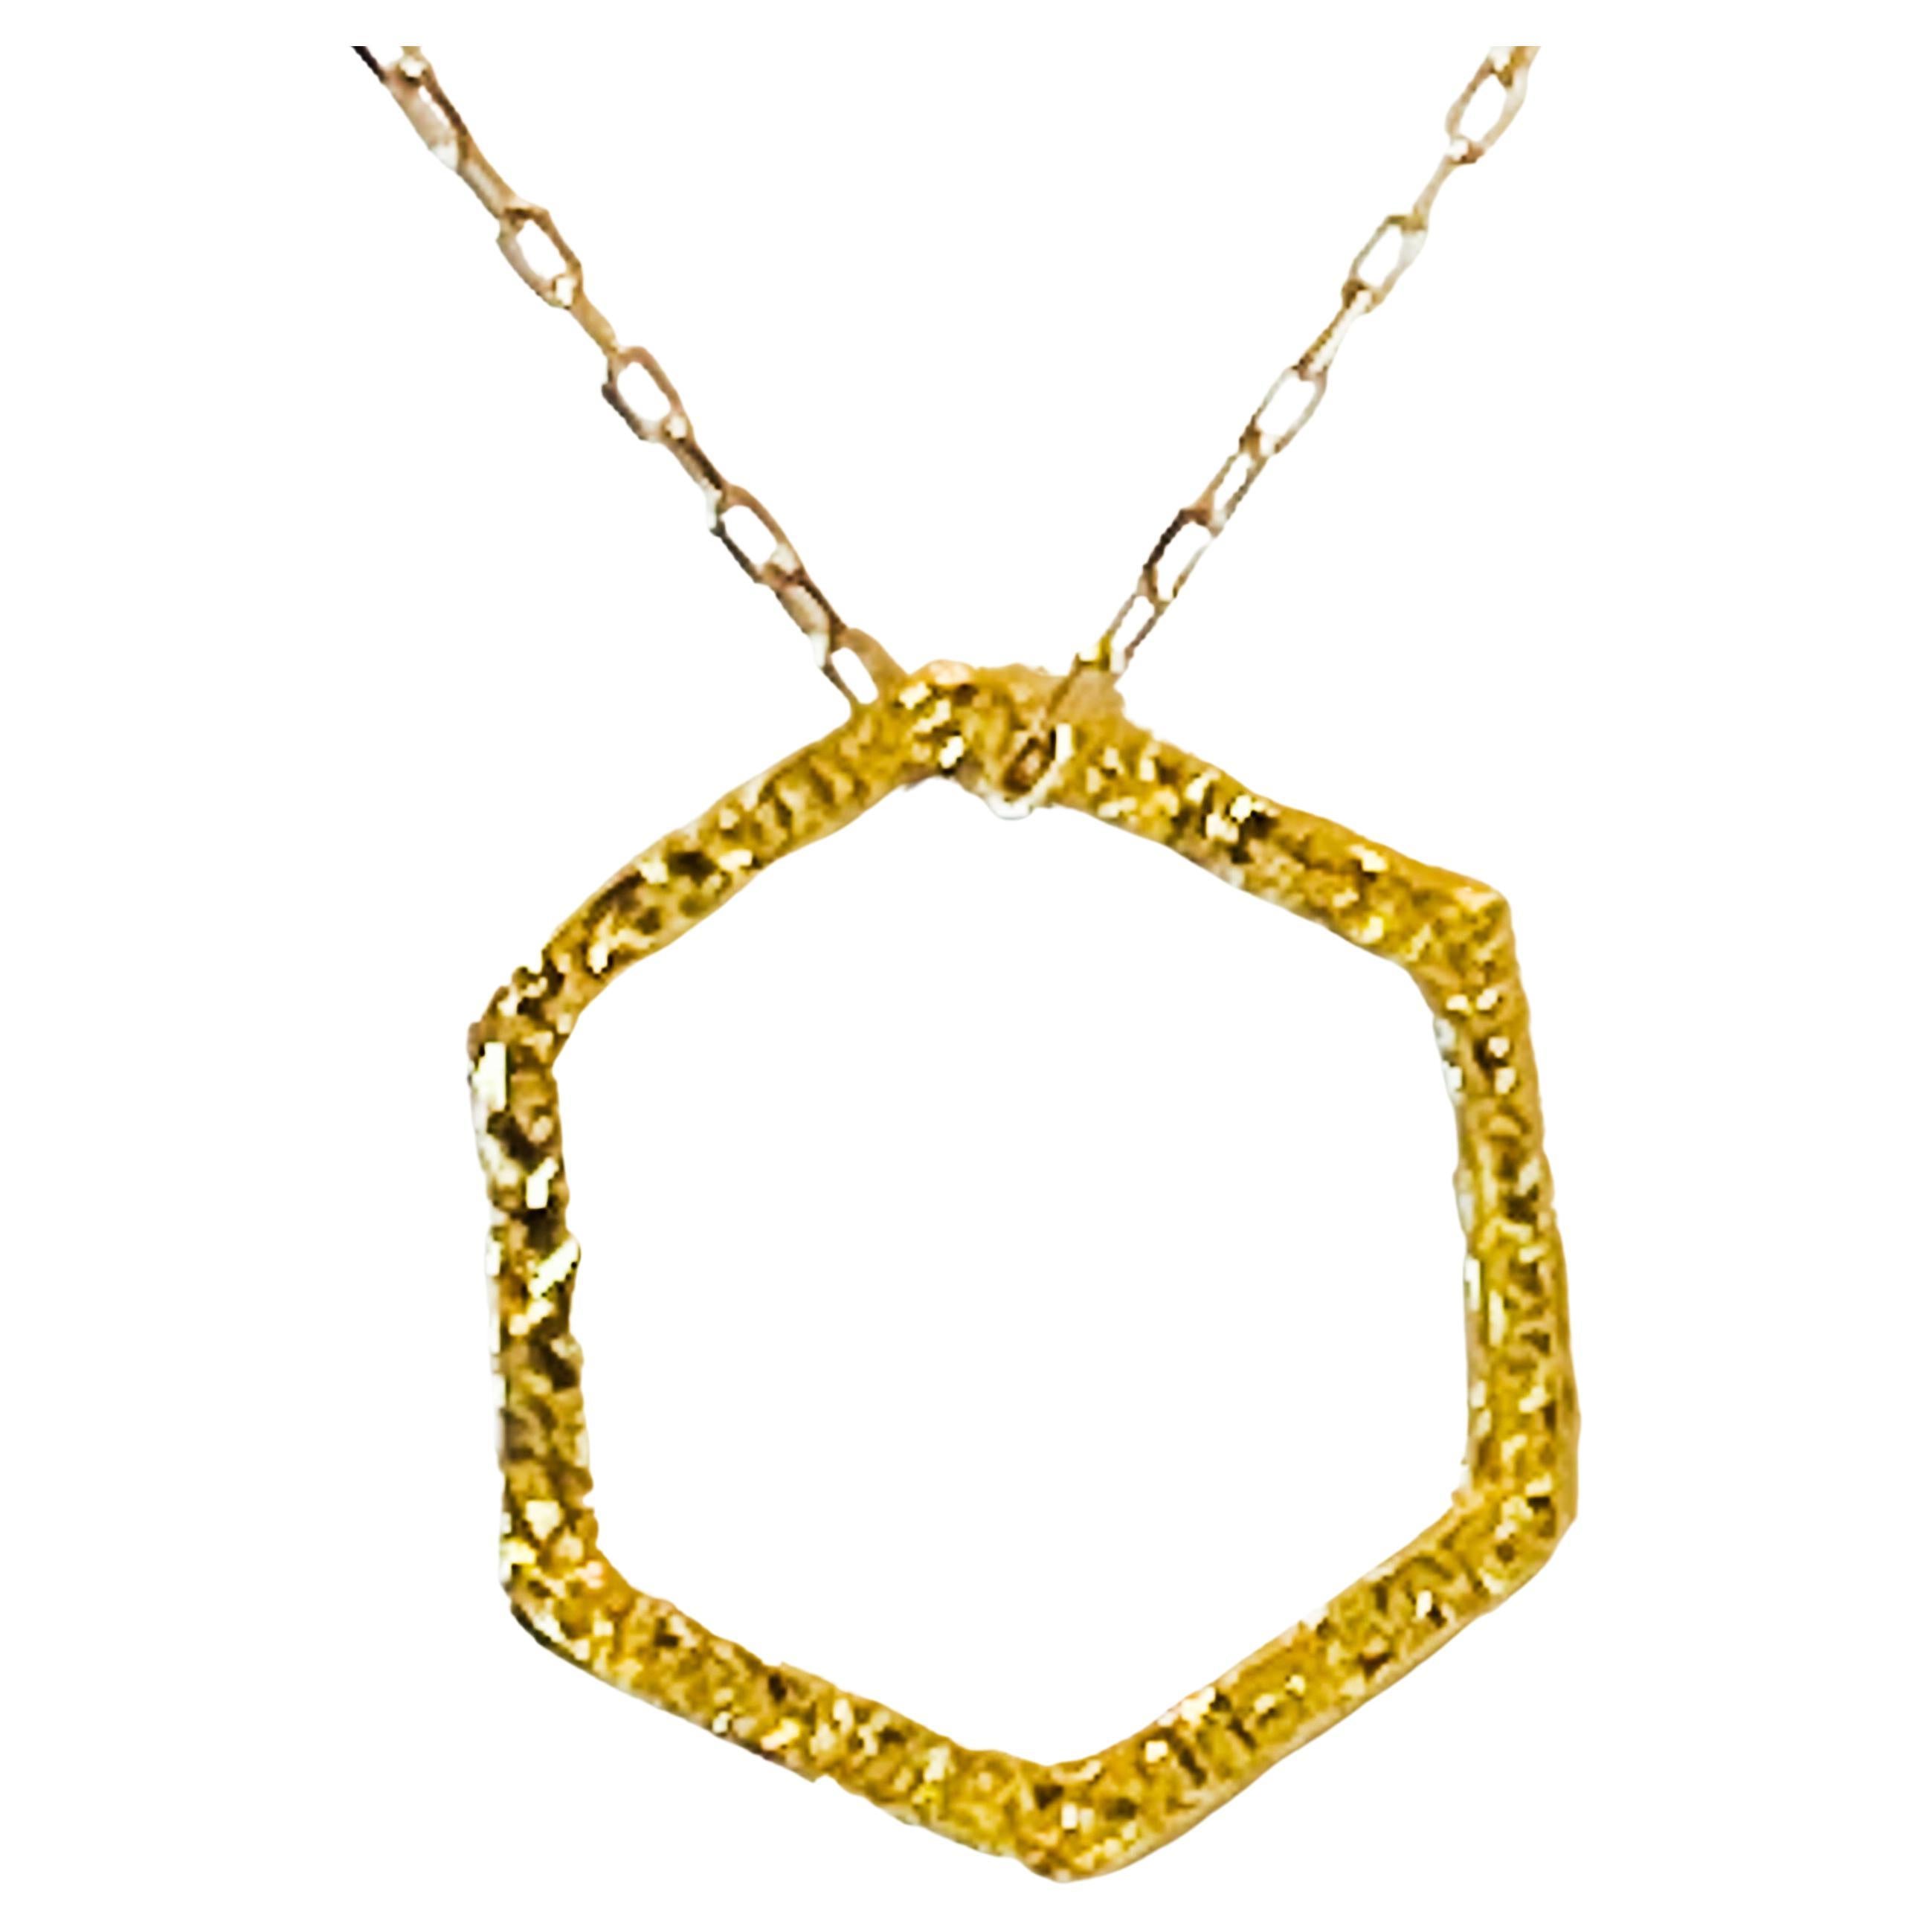 22k Gold Hexagon Necklace, by Tagili